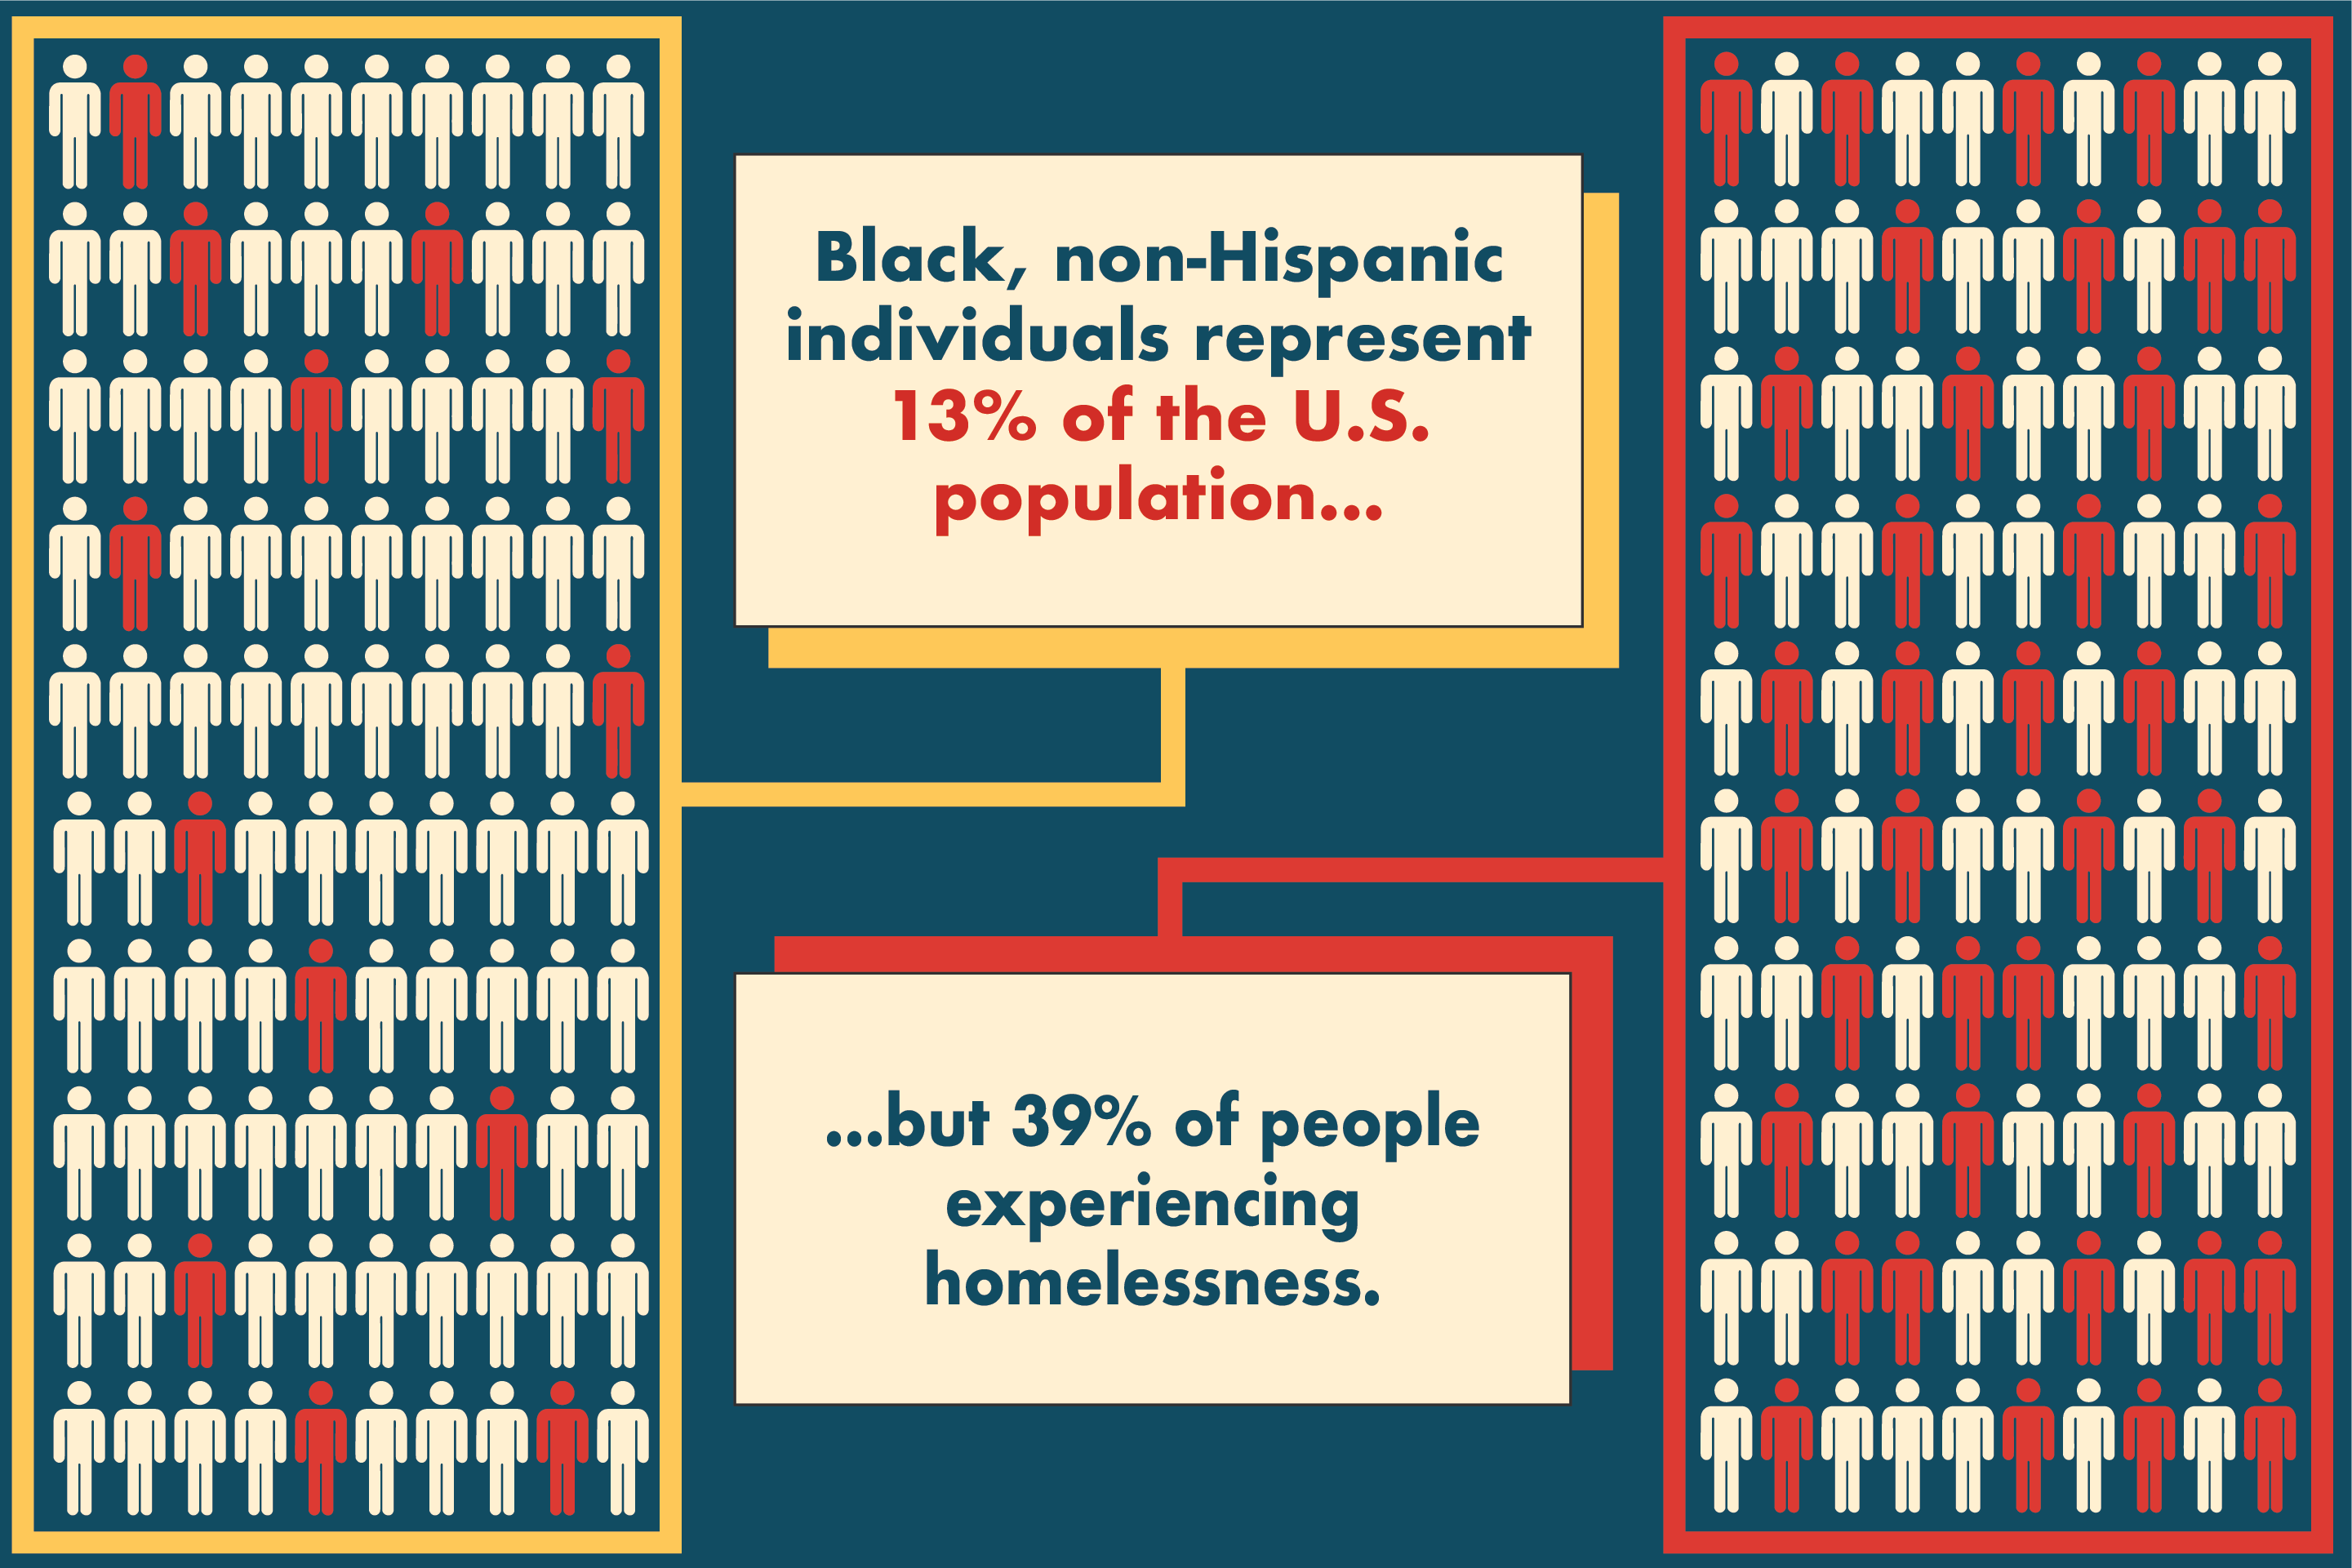 Black, non-Hispanic individuals represent 13% of the U.S. population, but 39% of people experiencing homelessness.